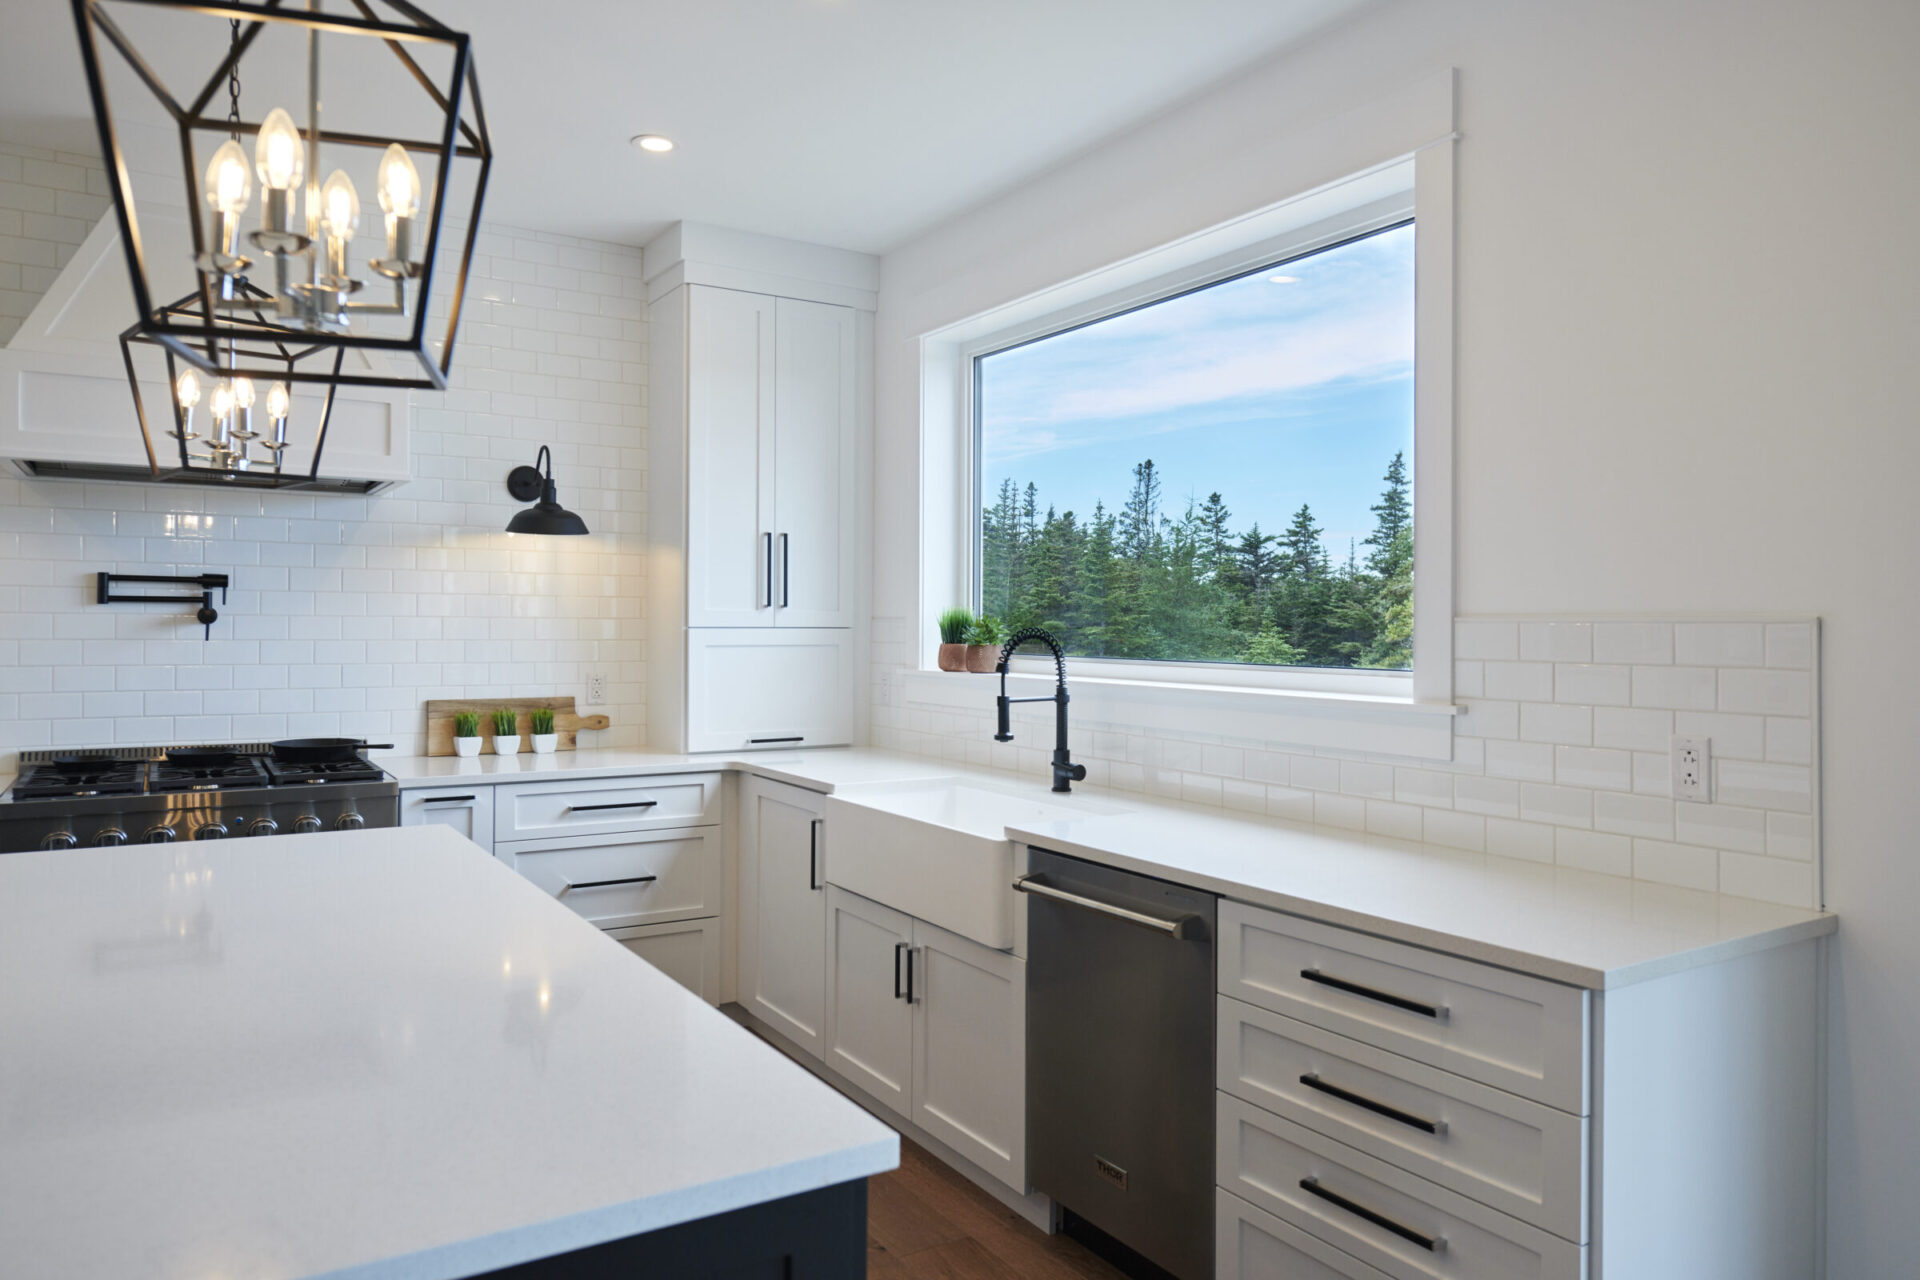 Modern kitchen interior with white cabinets, subway tiles, and stainless steel appliances. A window shows a forested view. Chic pendant light hangs above.